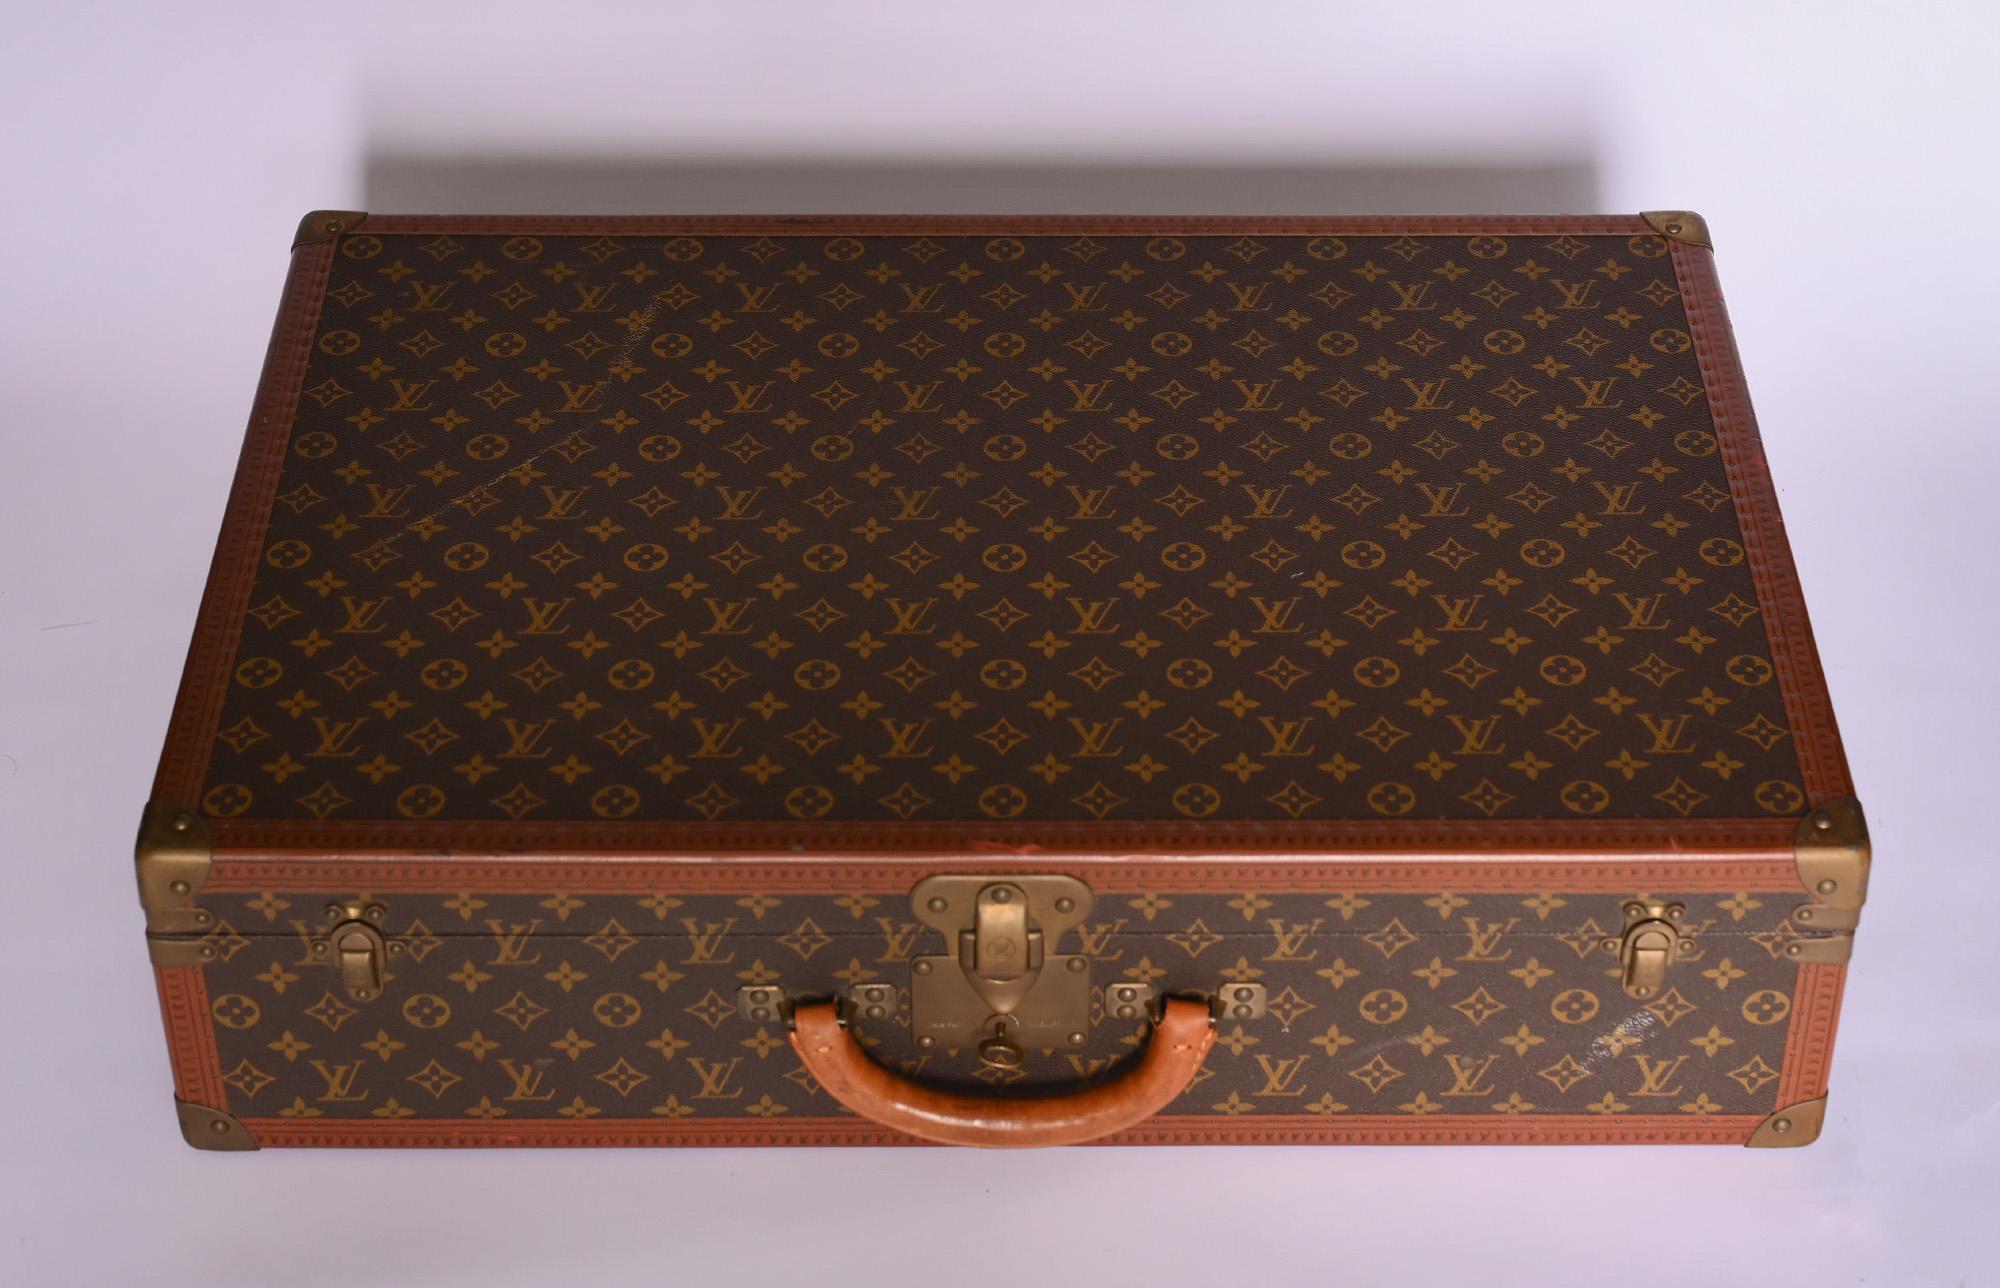 A dream for every collector. Very neat condition with original key and even patina. Gold-colored brass fittings. 
Louis Vuitton suitcase, Bisten 70 with removable tray, in wonderful, well-kept condition with original working keys.
906888 Bisten 70